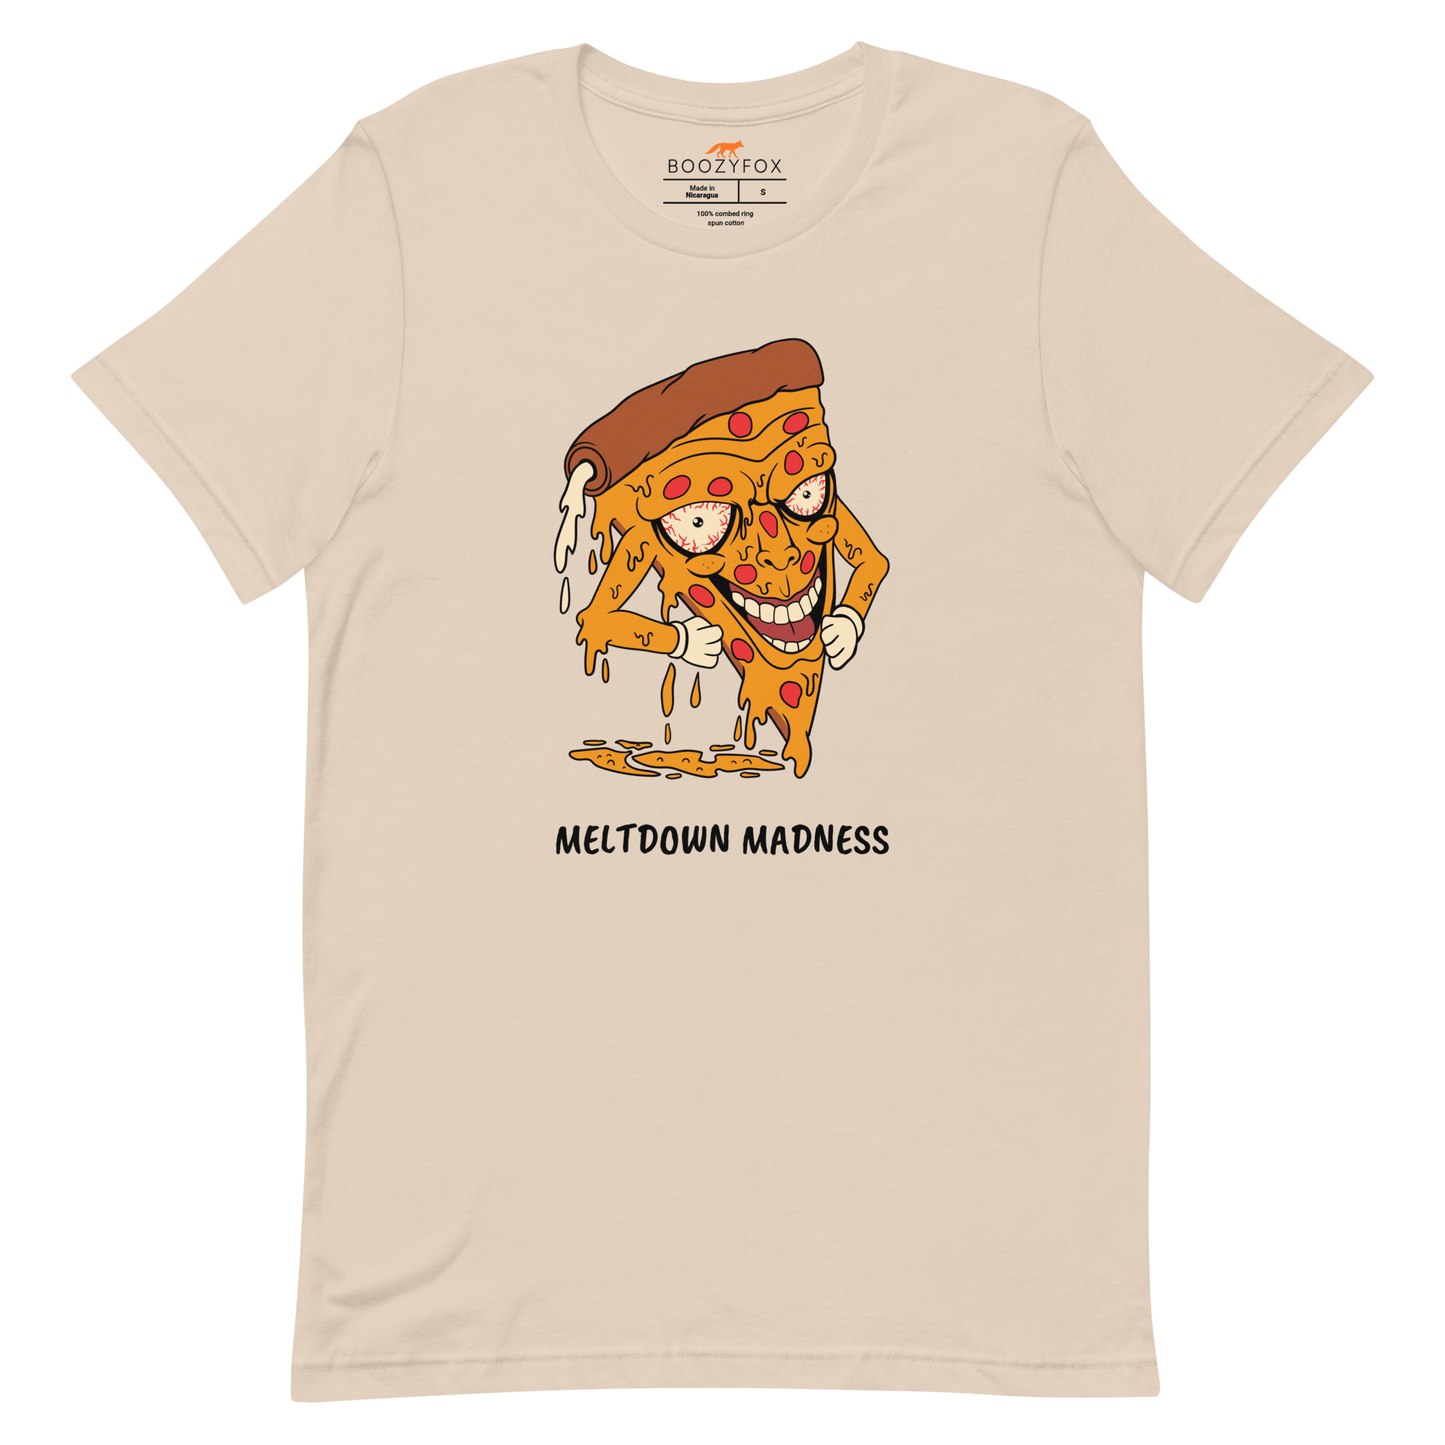 Soft Cream Premium Melting Pizza Tee featuring a Meltdown Madness graphic on the chest - Funny Graphic Pizza Tees - Boozy Fox